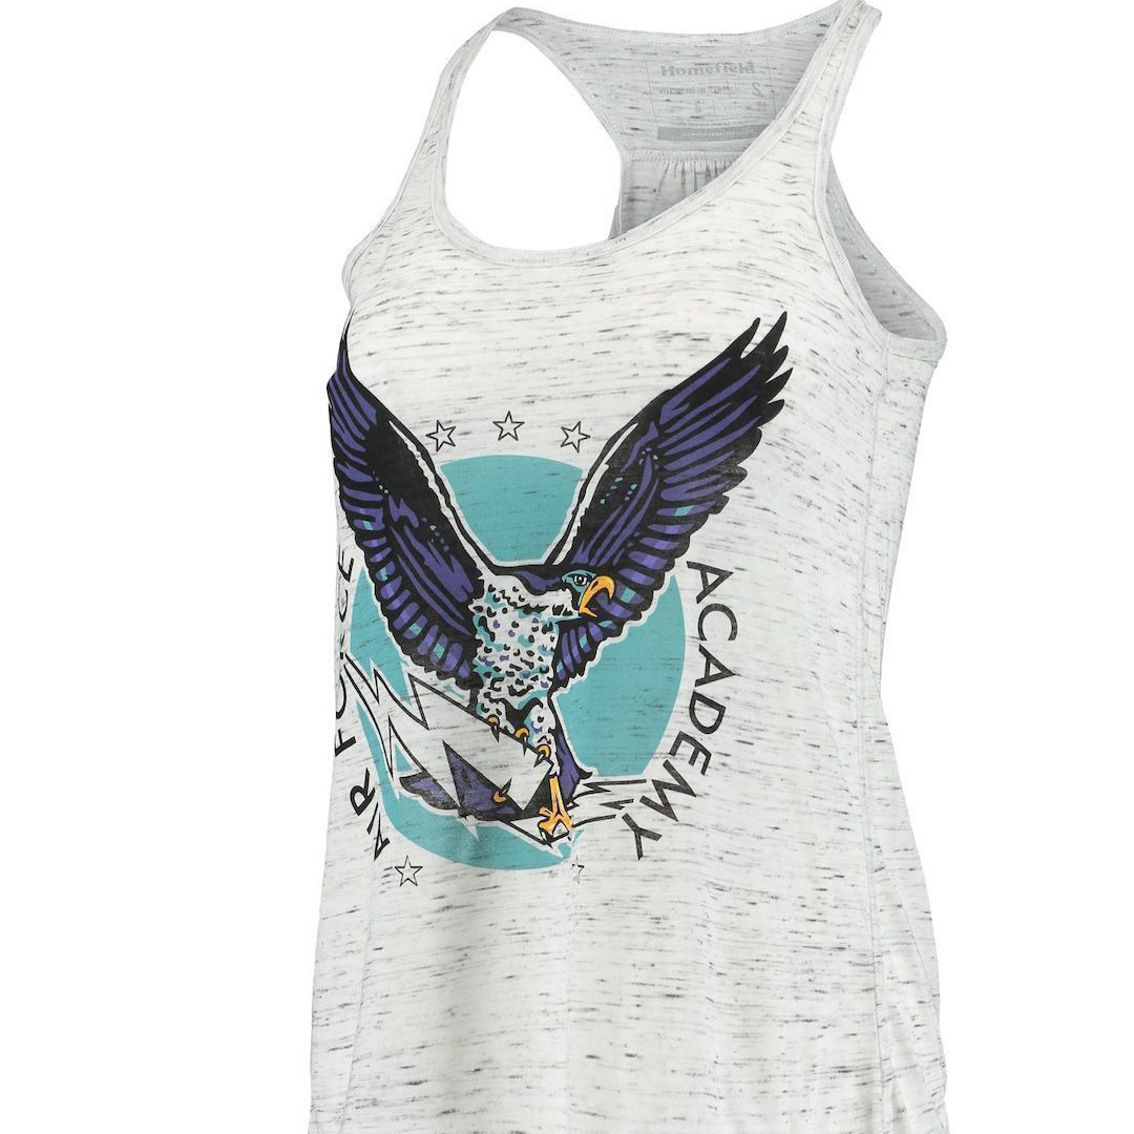 Homefield Women's Ash Air Force Falcons Vintage Racerback Tank Top - Image 3 of 4